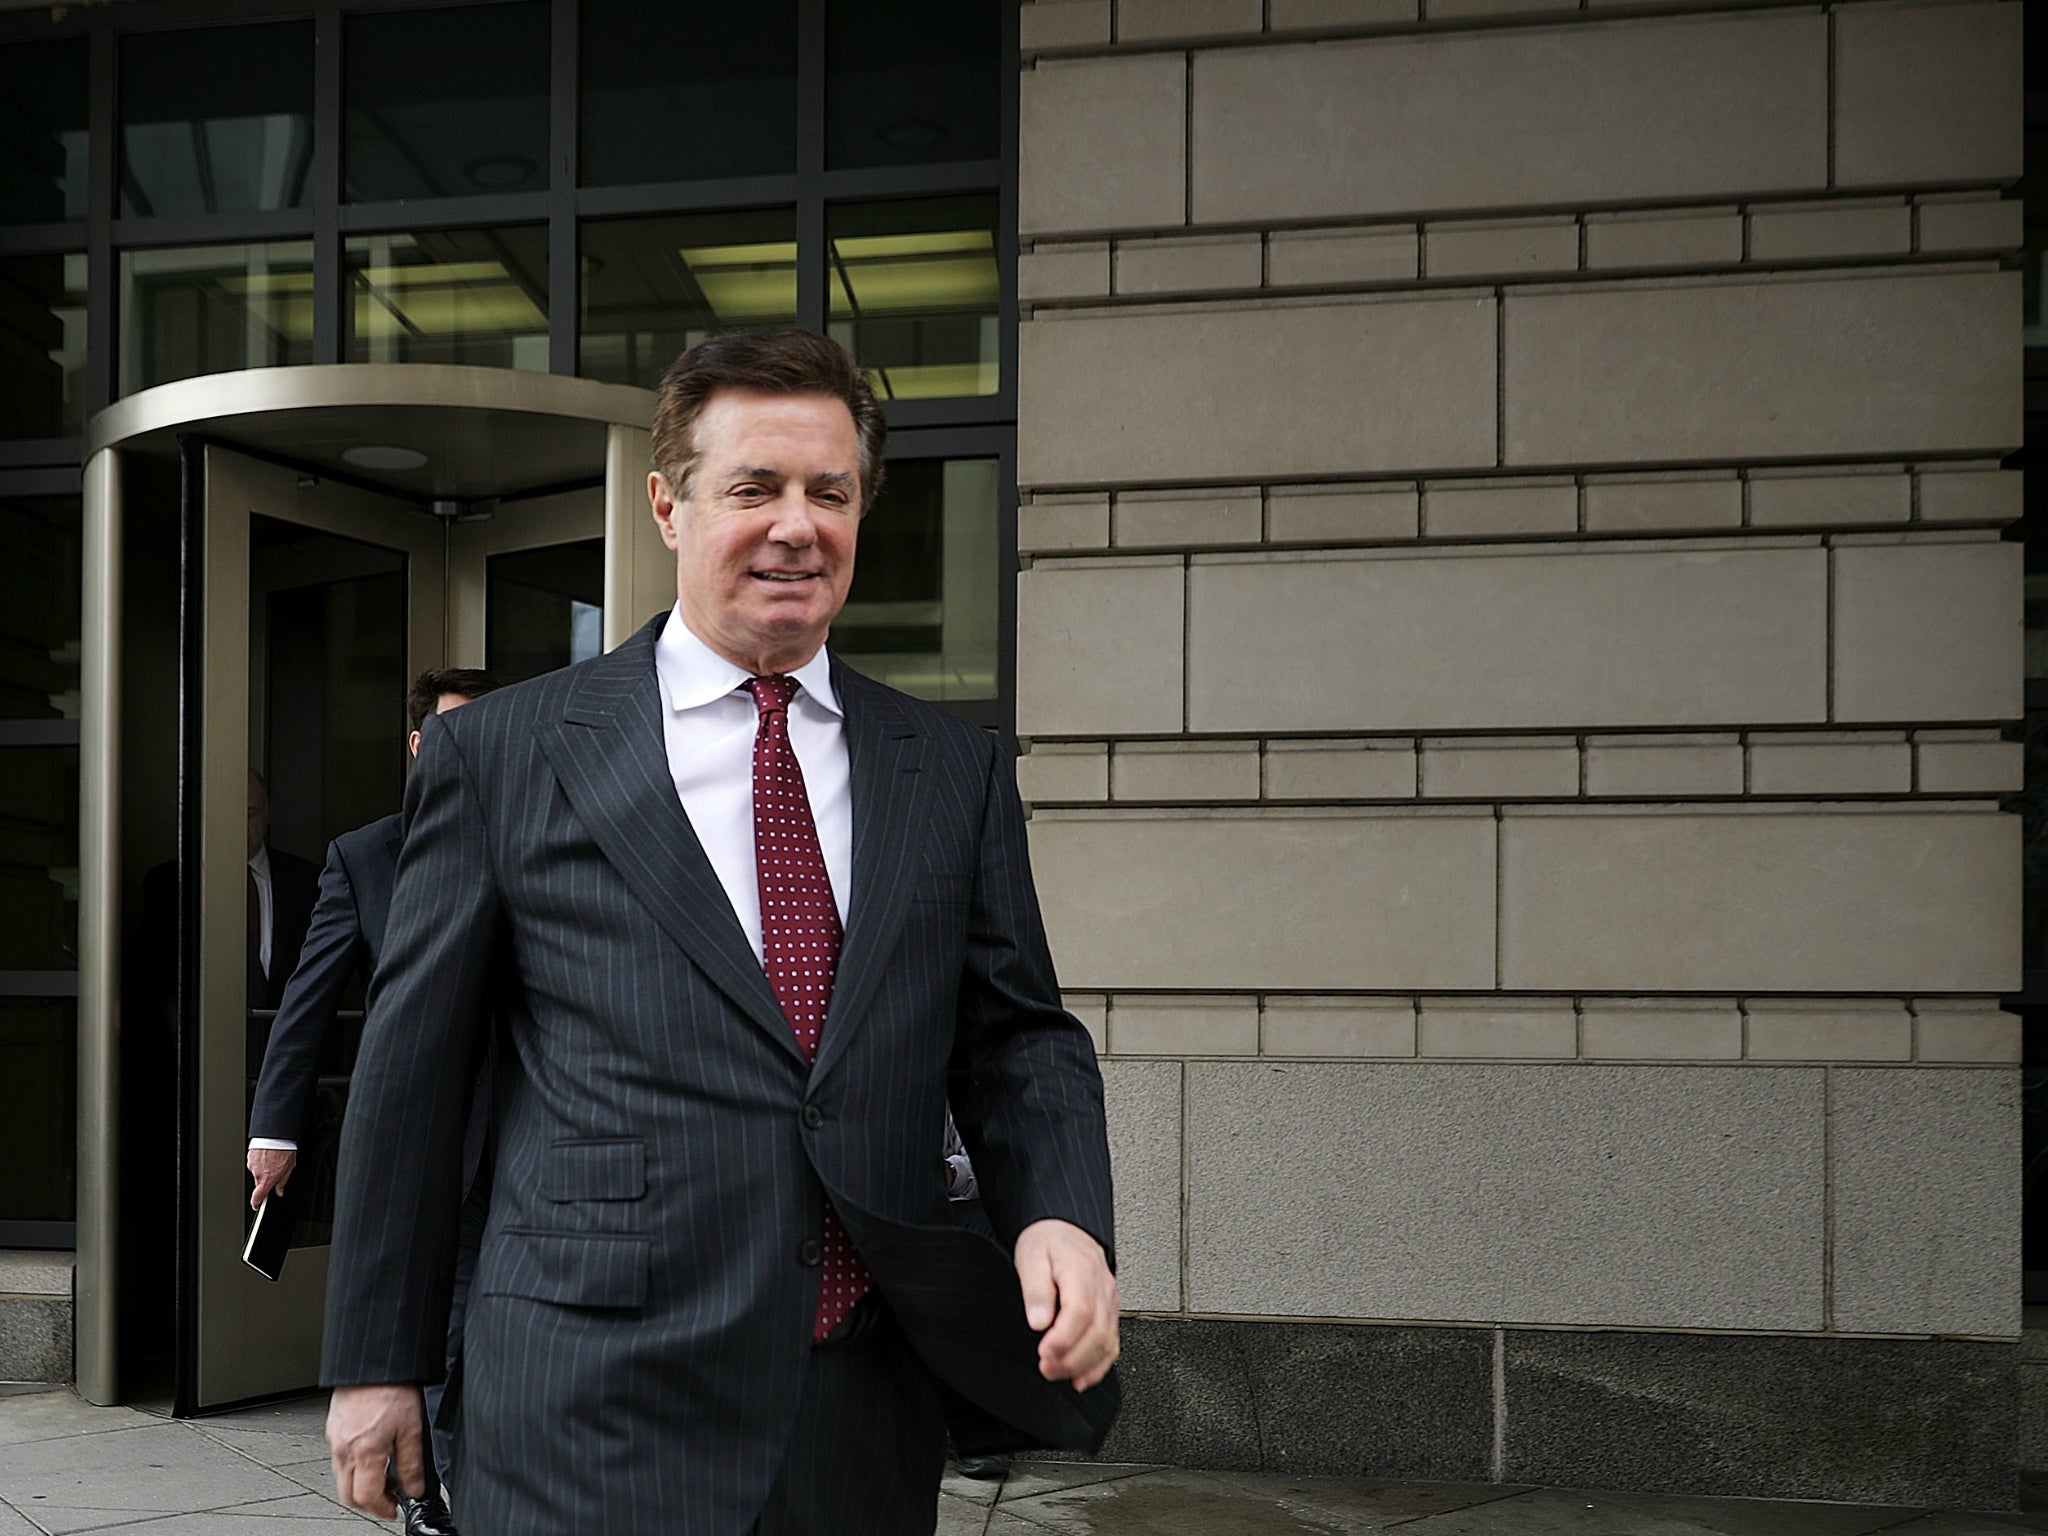 Former Trump campaign manager Paul Manafort has been accused of witness tampering by Special Counsel Robert Mueller, who is investigating potential collusion between President Donald Trump's campaign and Russia.